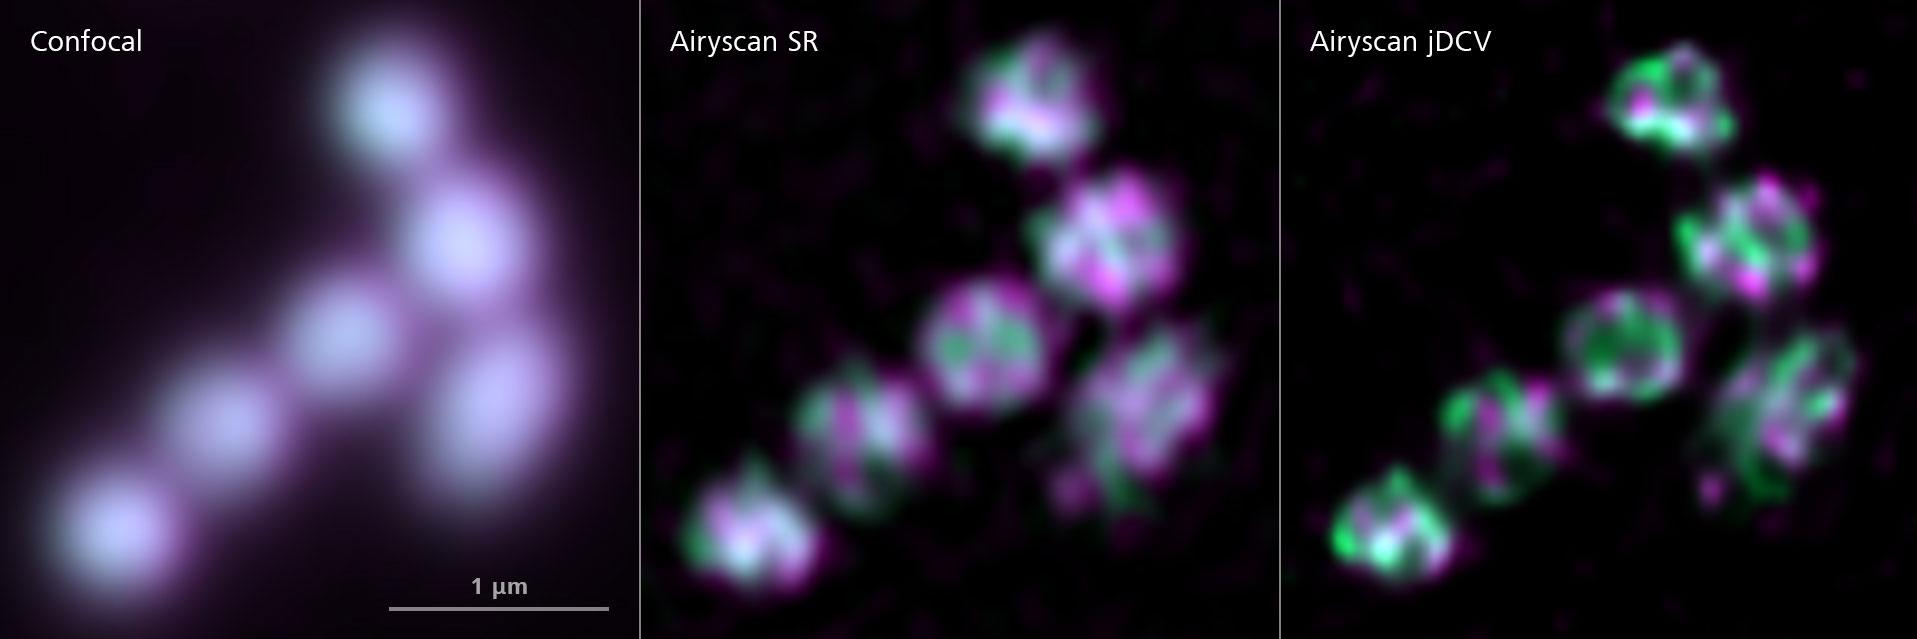 Mitochondria in an Arabidopsis thaliana cell. Comparing the confocal image with Airyscan SR and Airyscan Joint Deconvolution.